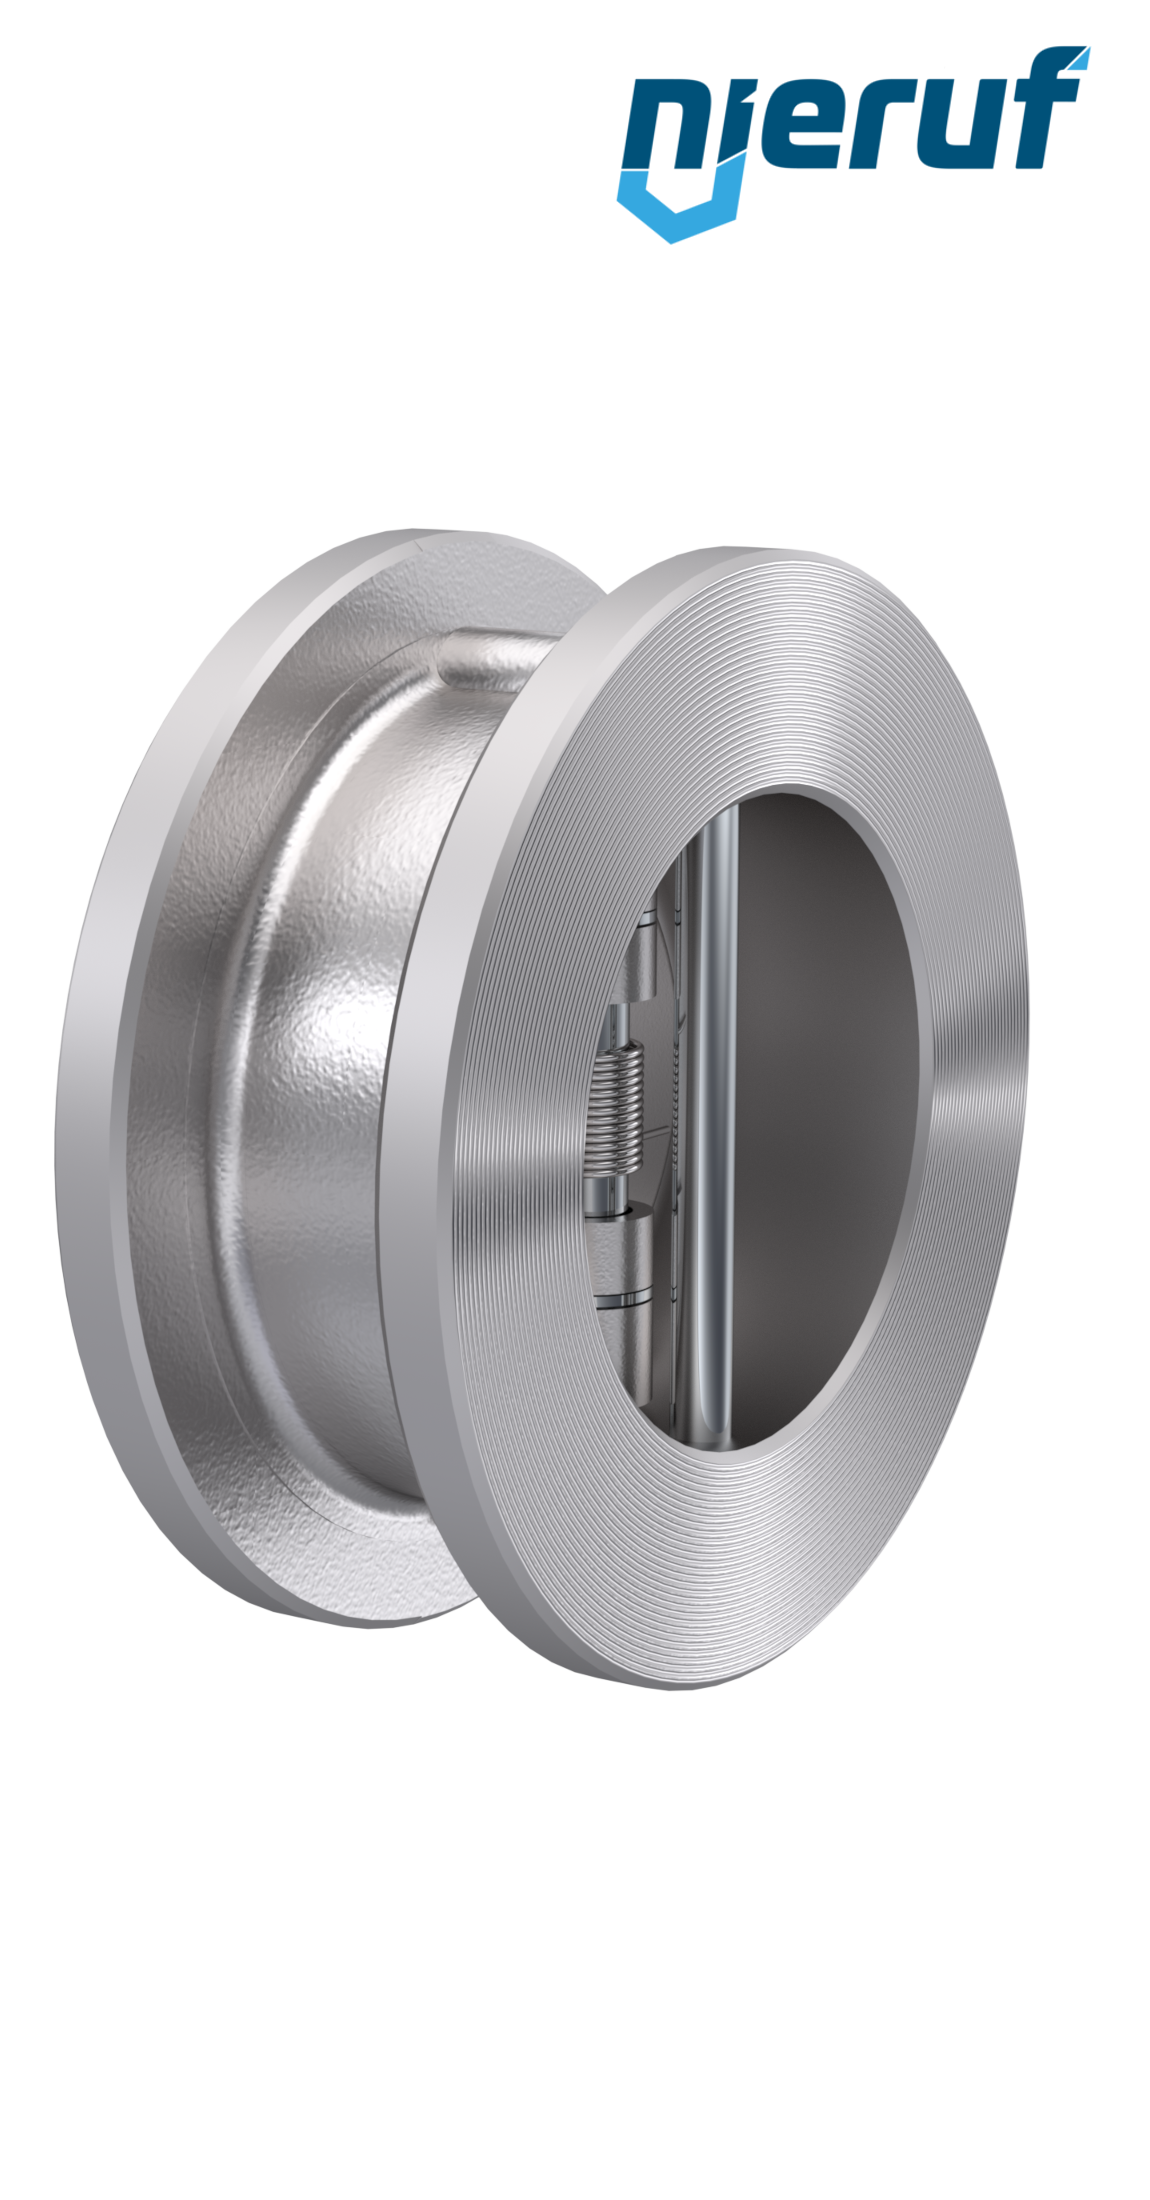 dual plate check valve DN80 DR03 ANSI 150 stainless steel 1.4408 metal